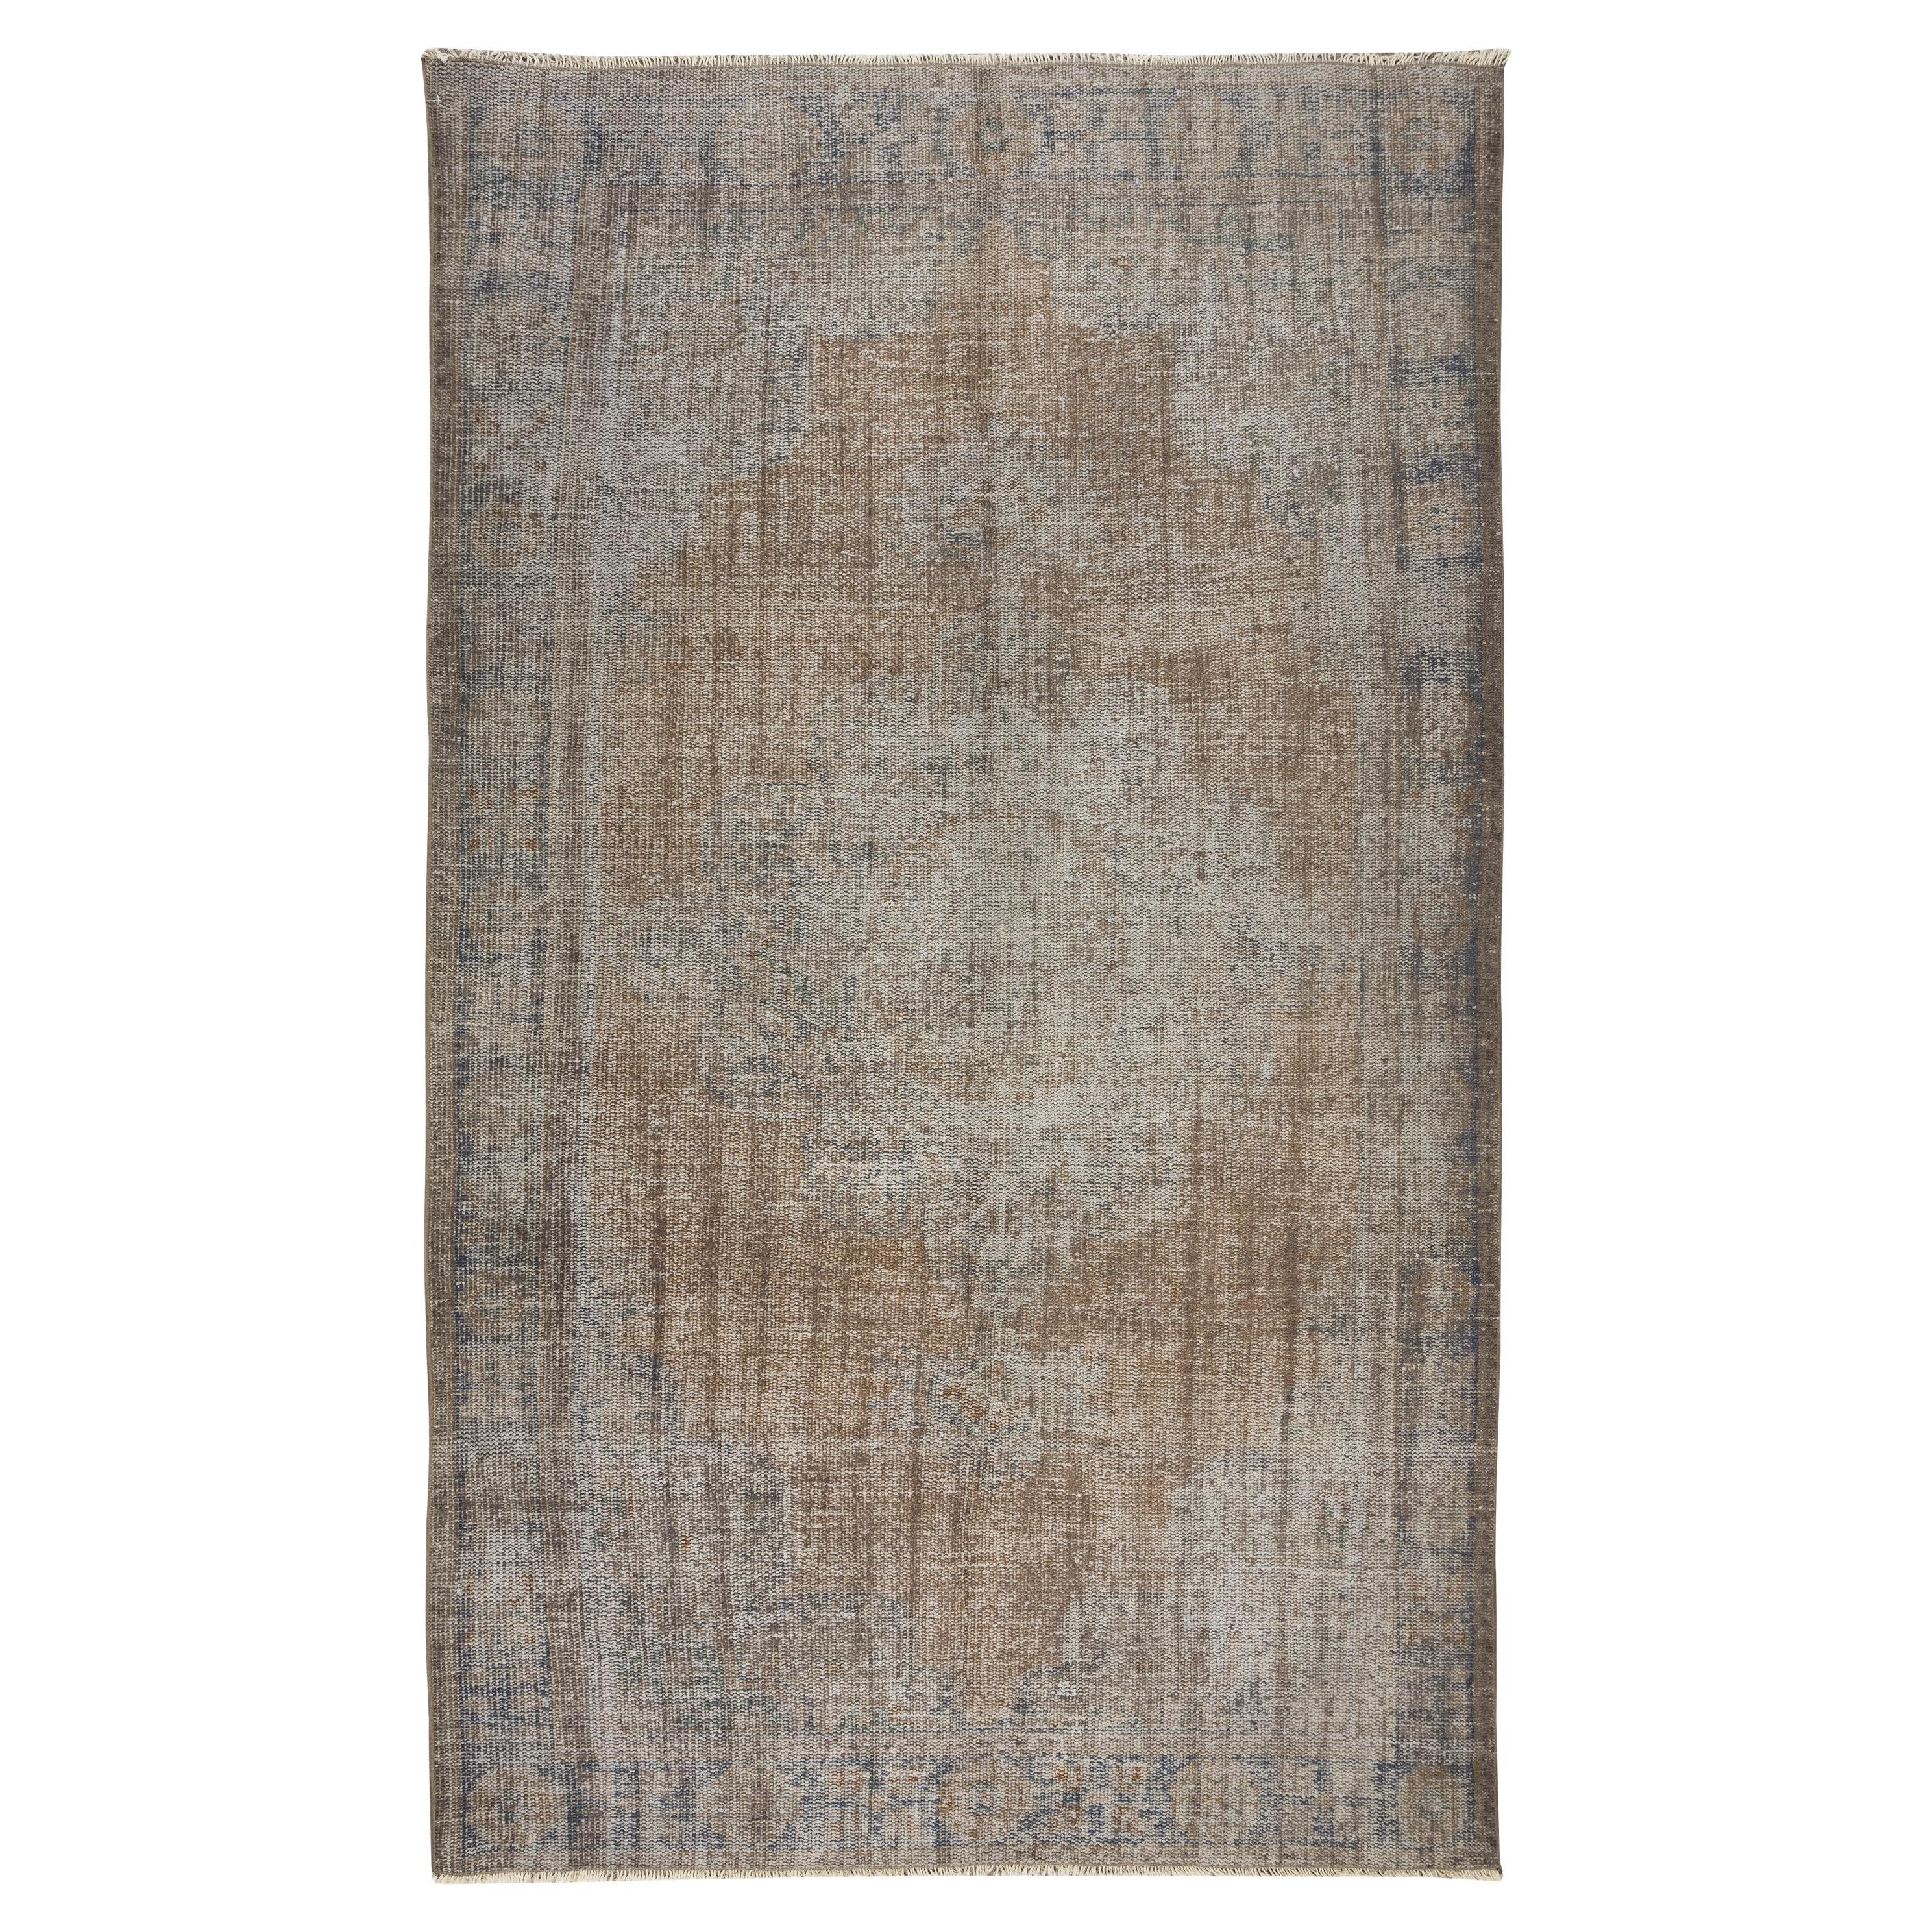 6x10 Ft Vintage Area Rug in Gray for Modern Interiors, Handmade in Turkey